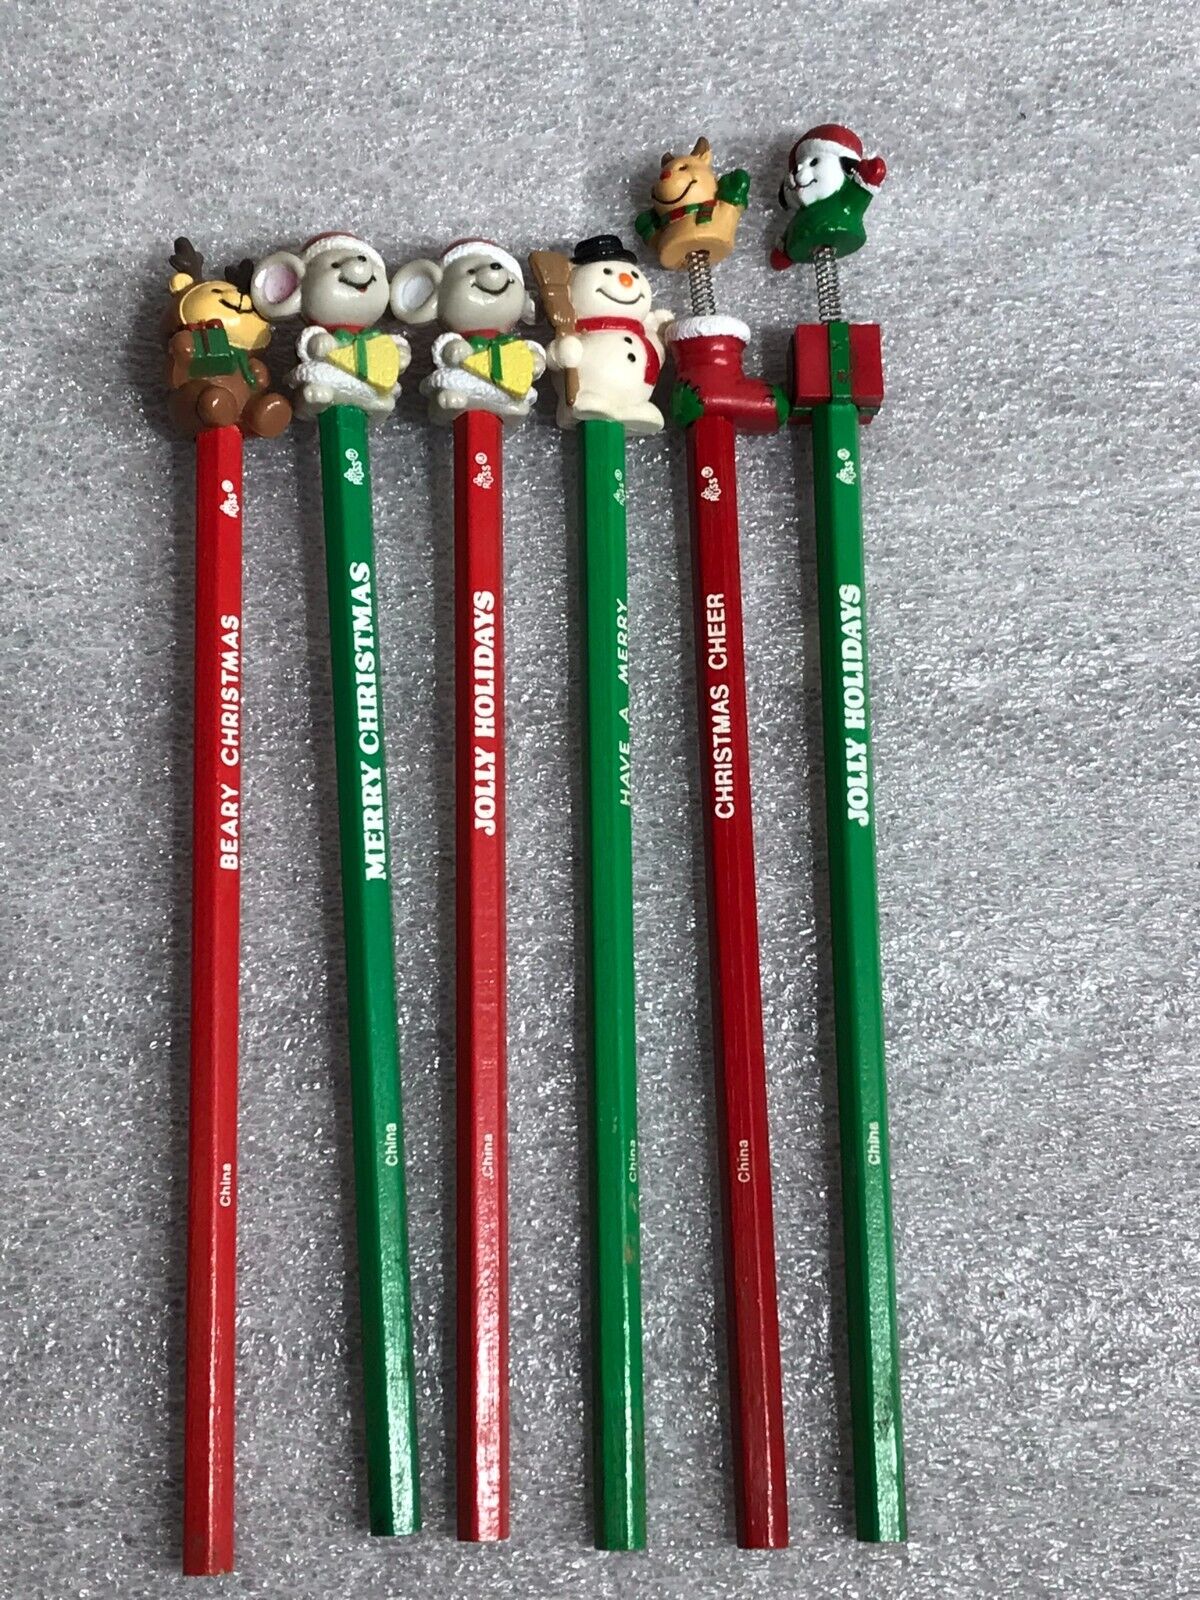 Lot of 6 Russ Berrie Rare Vintage 80\'s/90\'s Pencils and Toppers Christmas